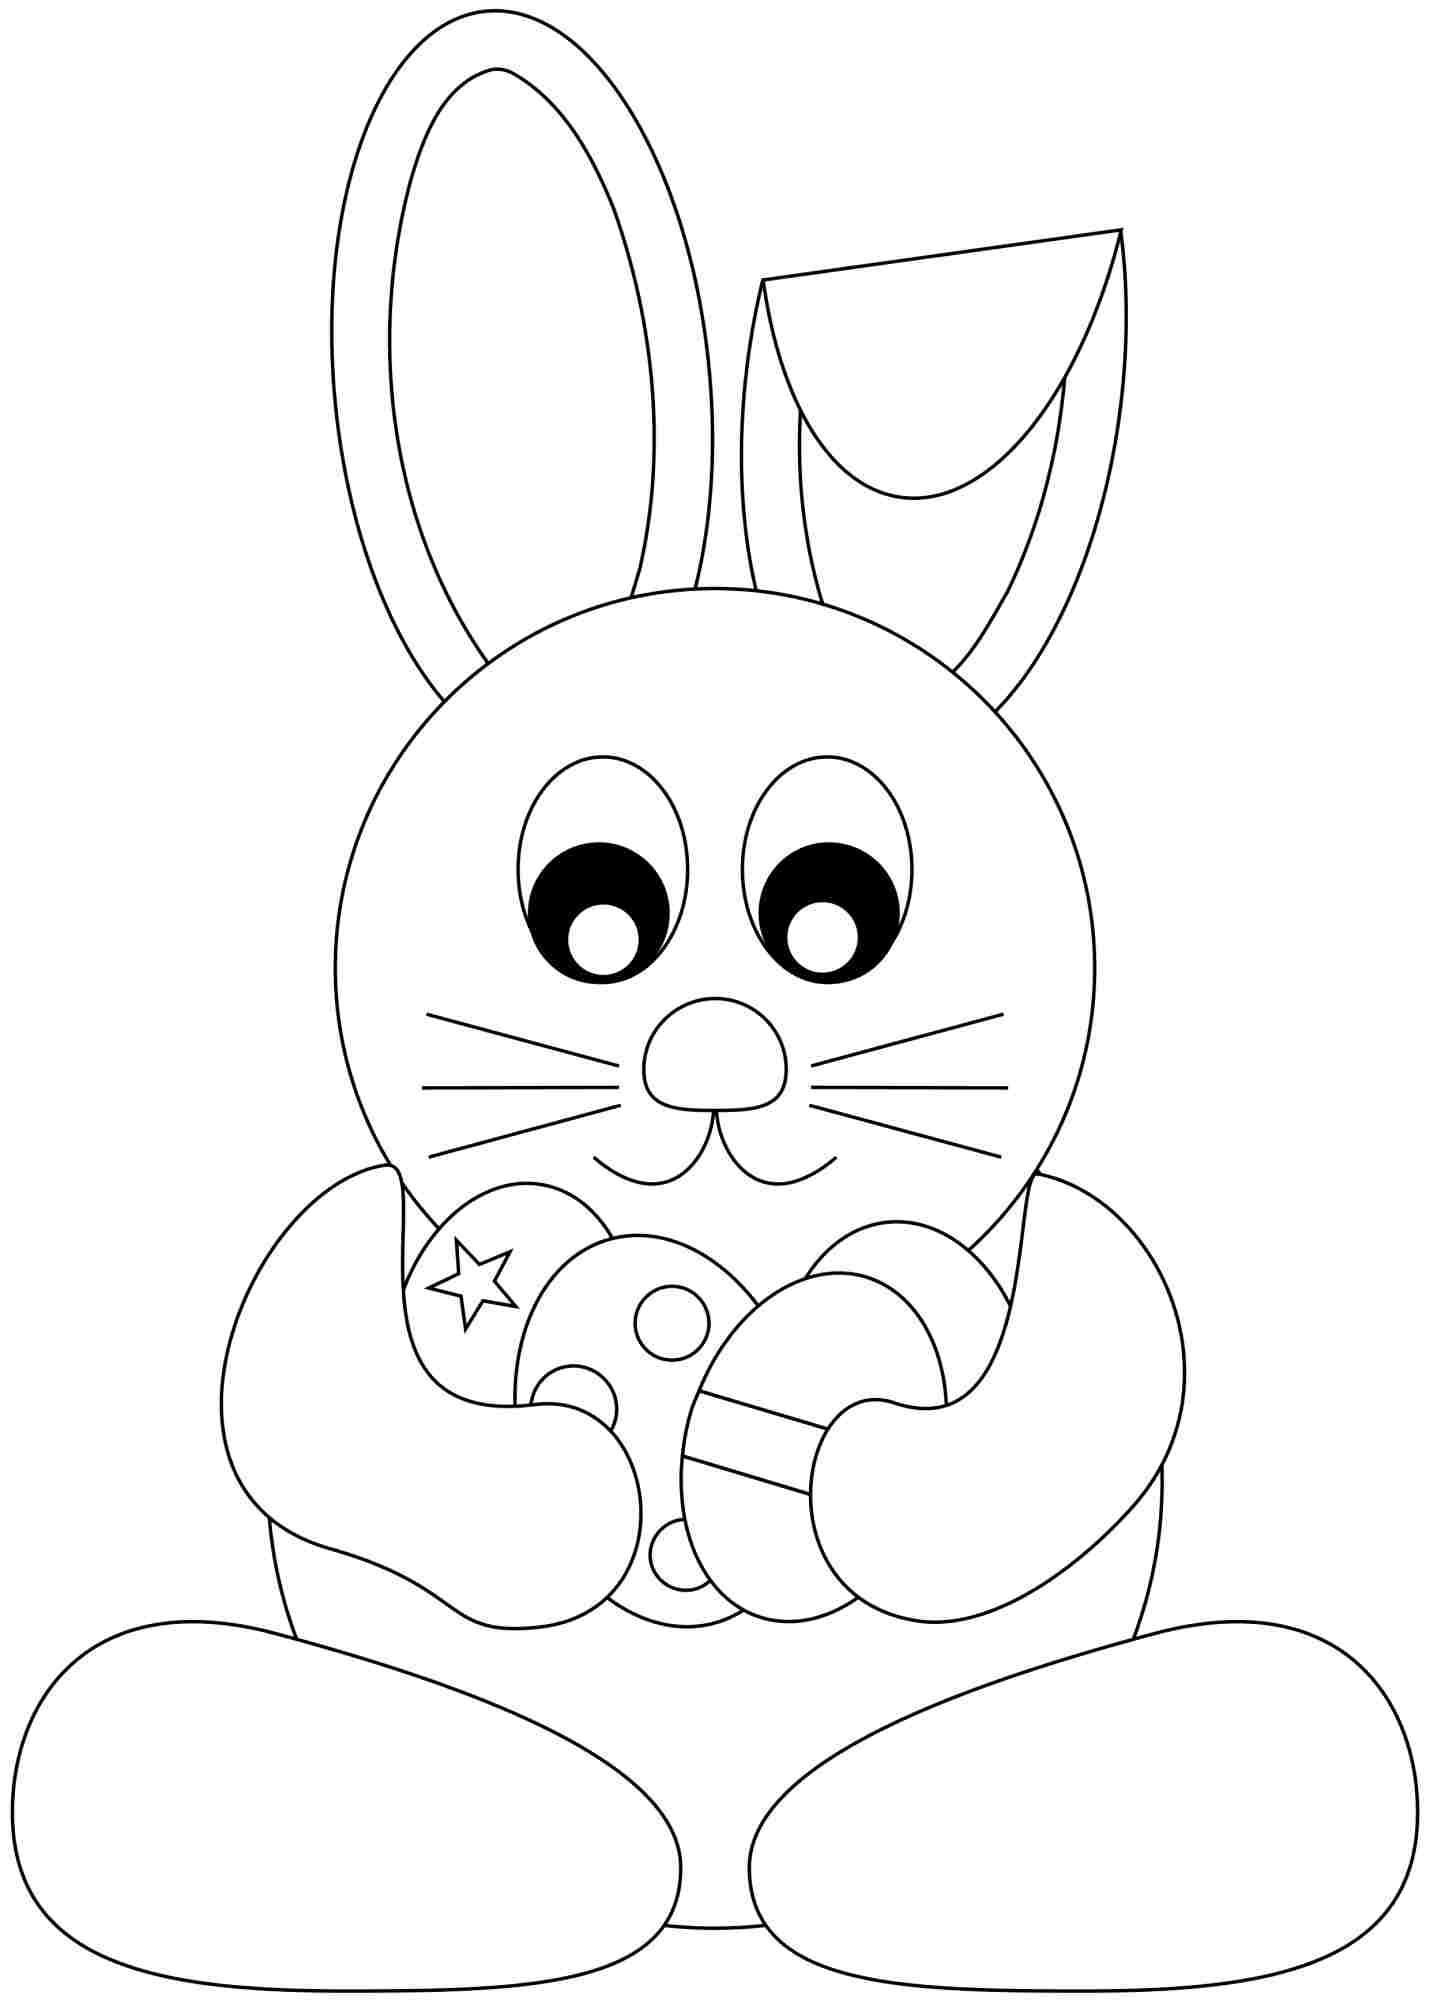 Easy Bunny Face Drawing at GetDrawings | Free download